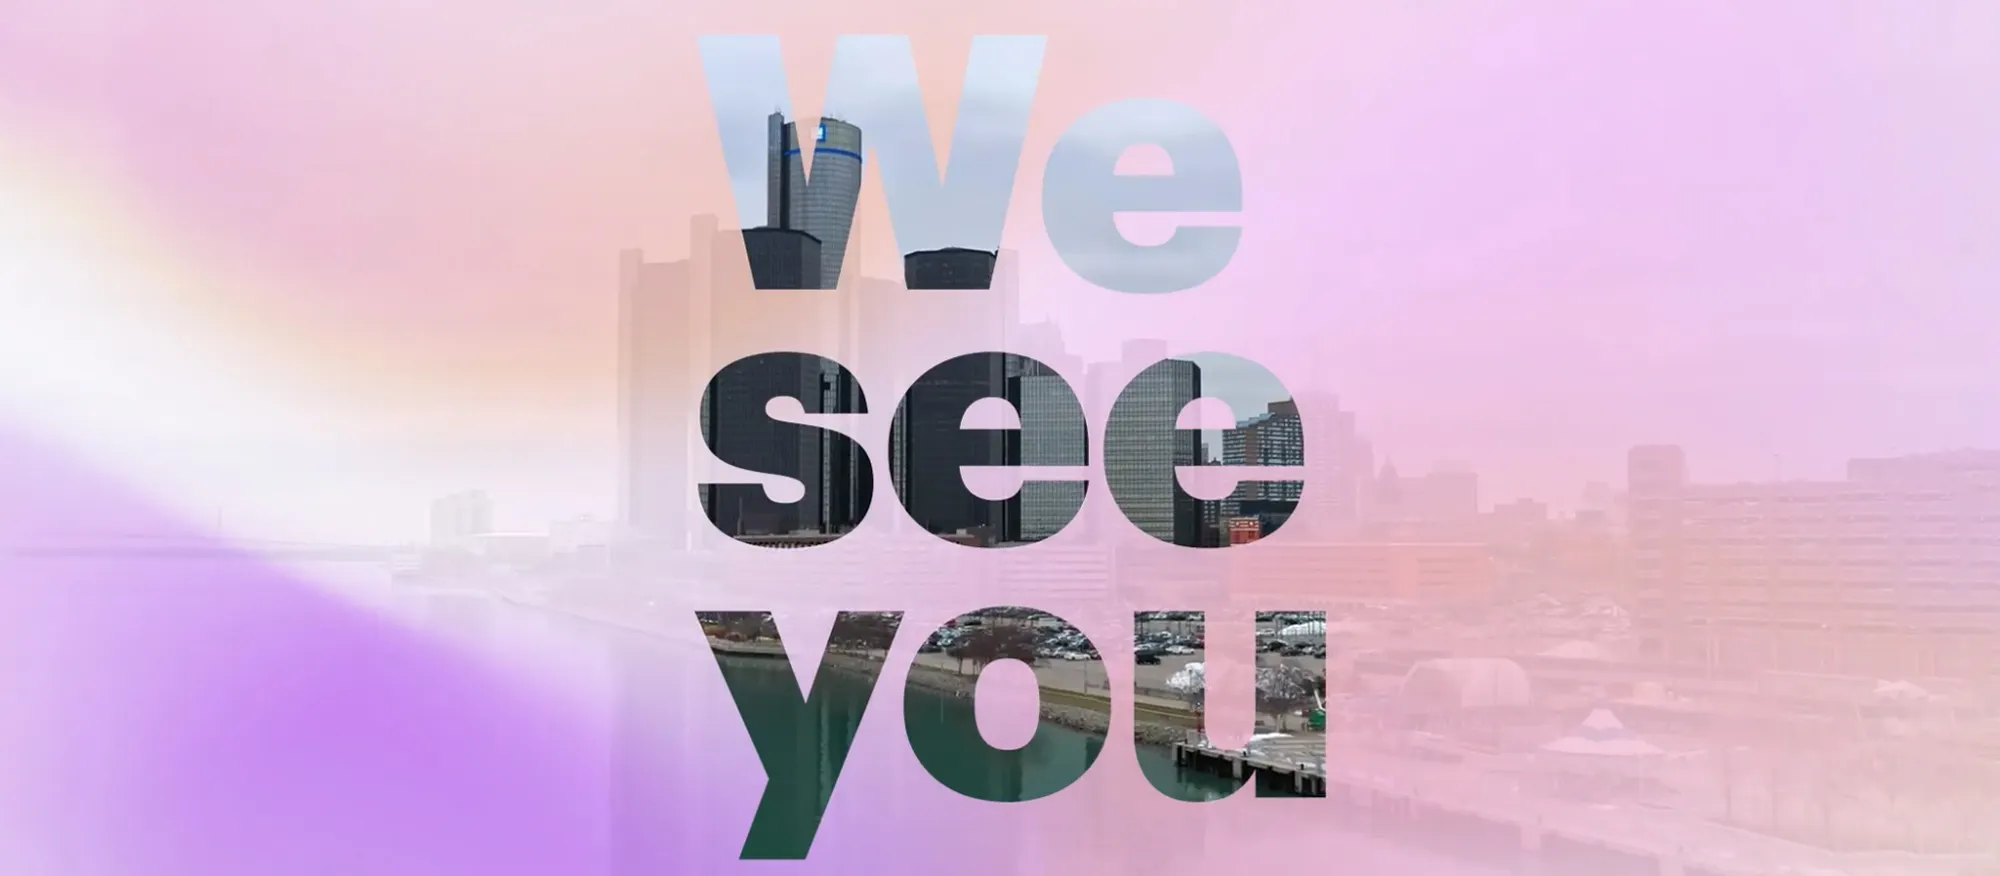 Image from Accenture Productions. "We see you". 